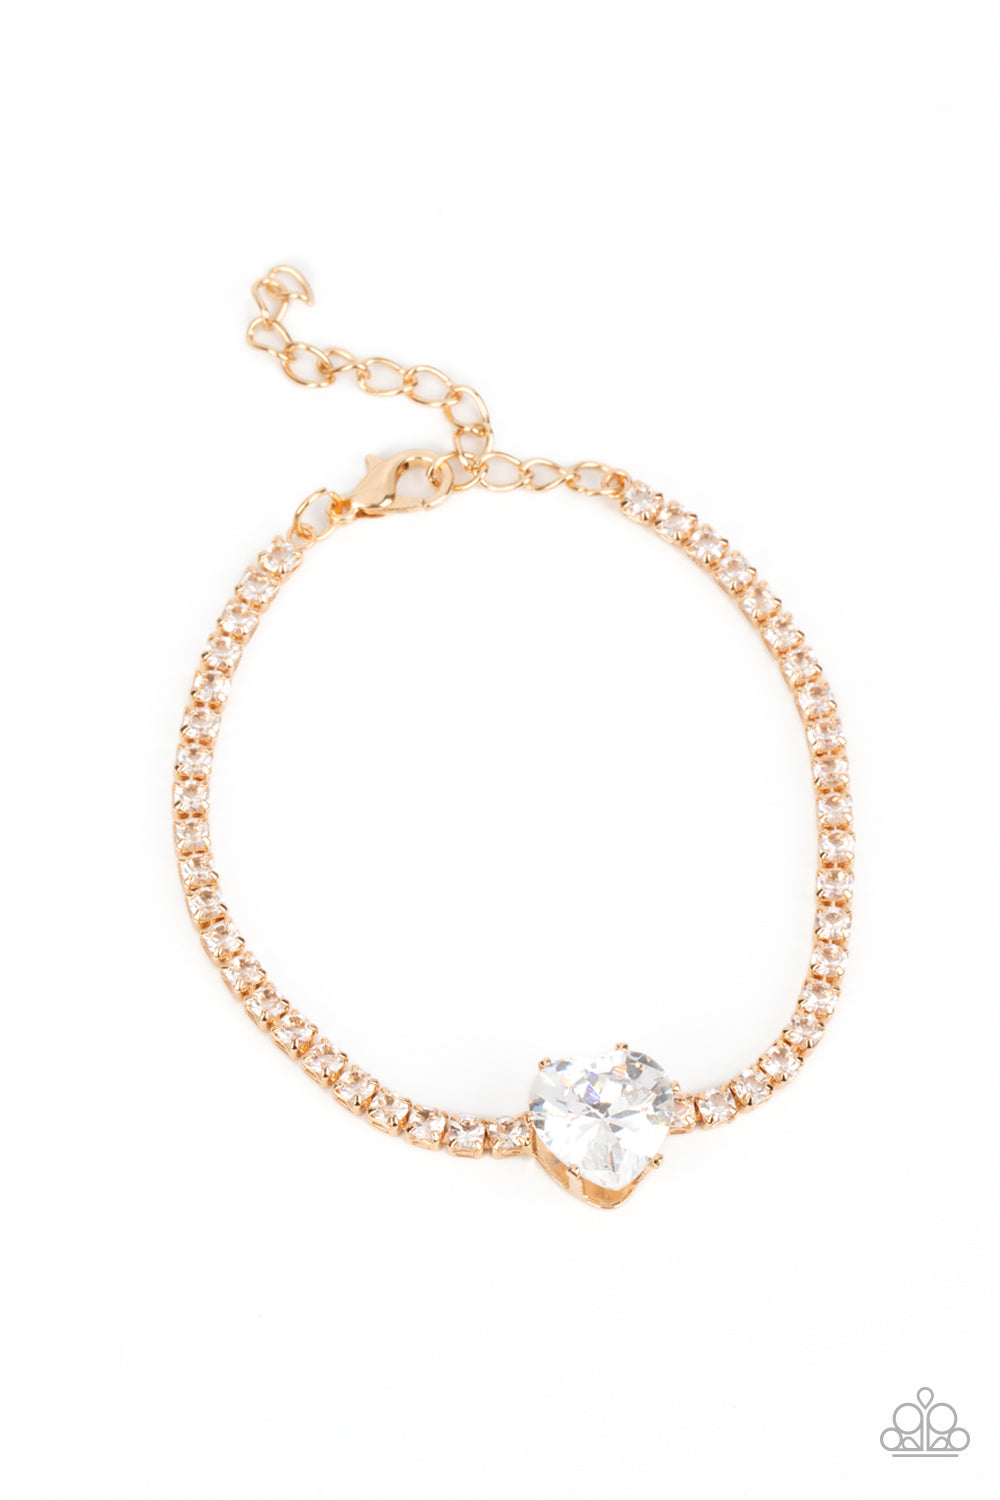 Paparazzi Accessories Bedazzled Beauty - Gold An oversized white heart-shaped gem, set in an airy, pronged gold fitting, glitters at the center of a blinding row of dainty, glassy white rhinestones set in square gold fittings, resulting in a flirtatious s